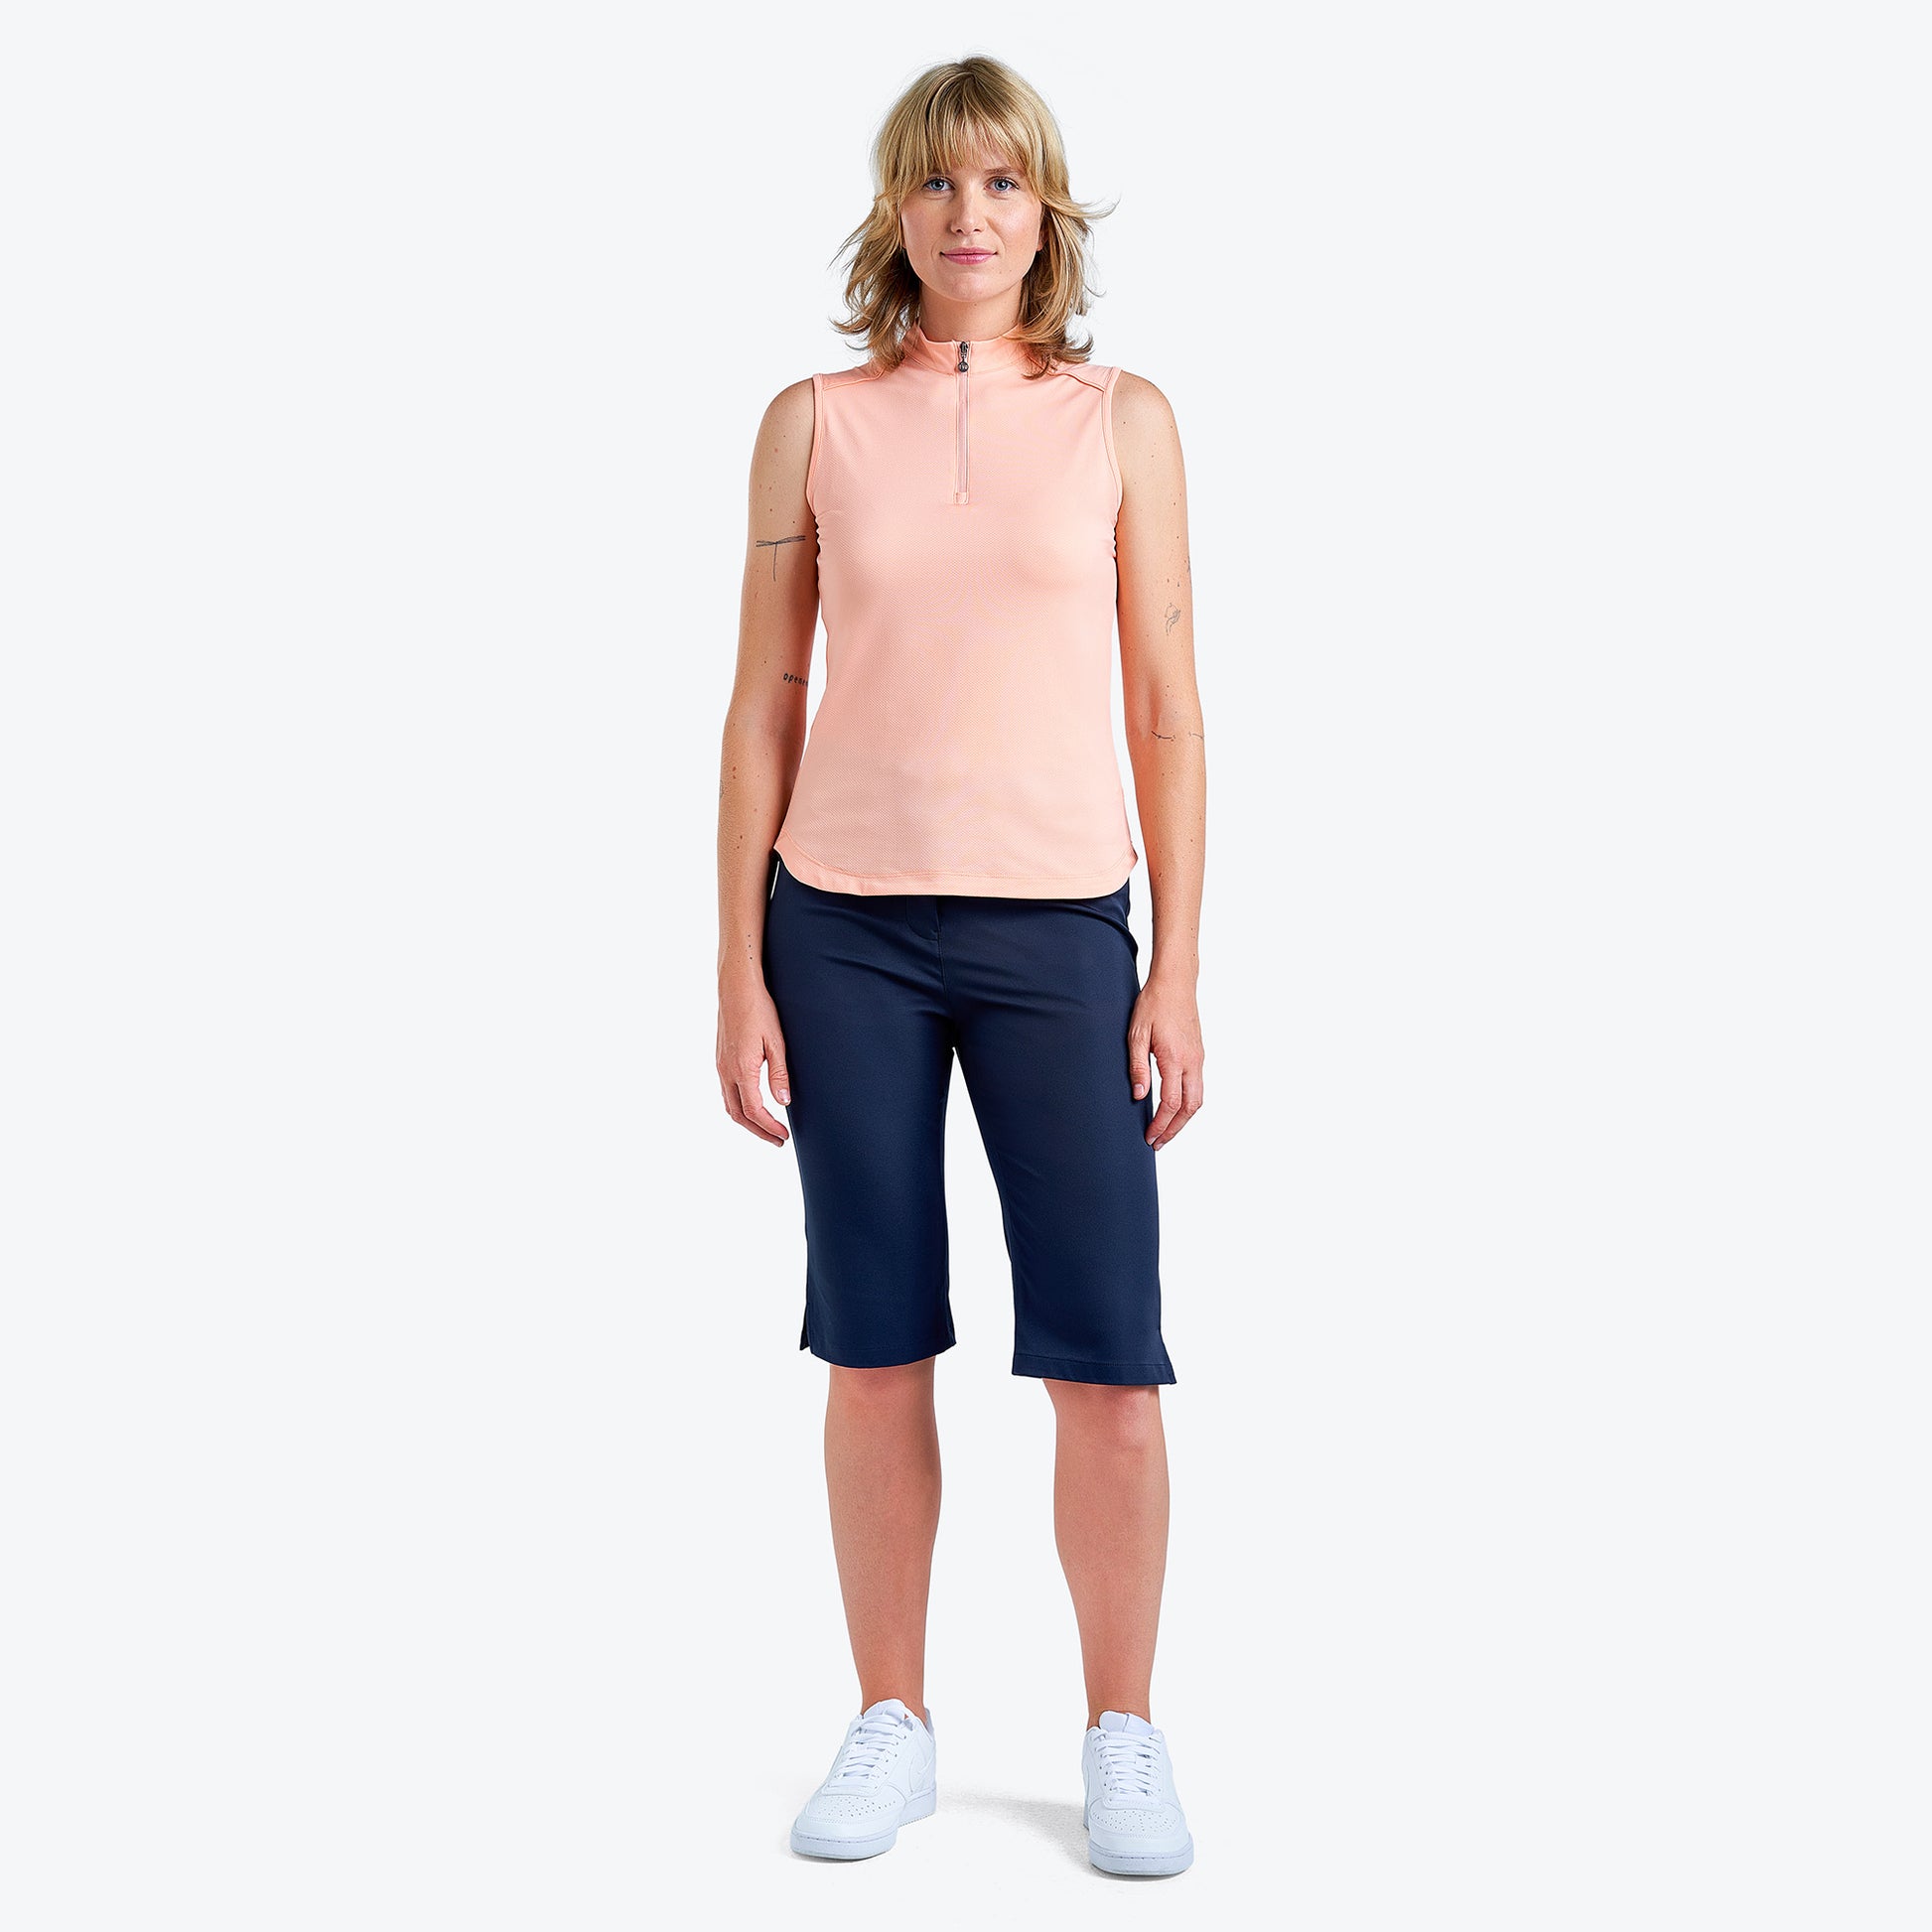 Nivo Ladies Sleeveless Polo with UPF50 in Coral Reef